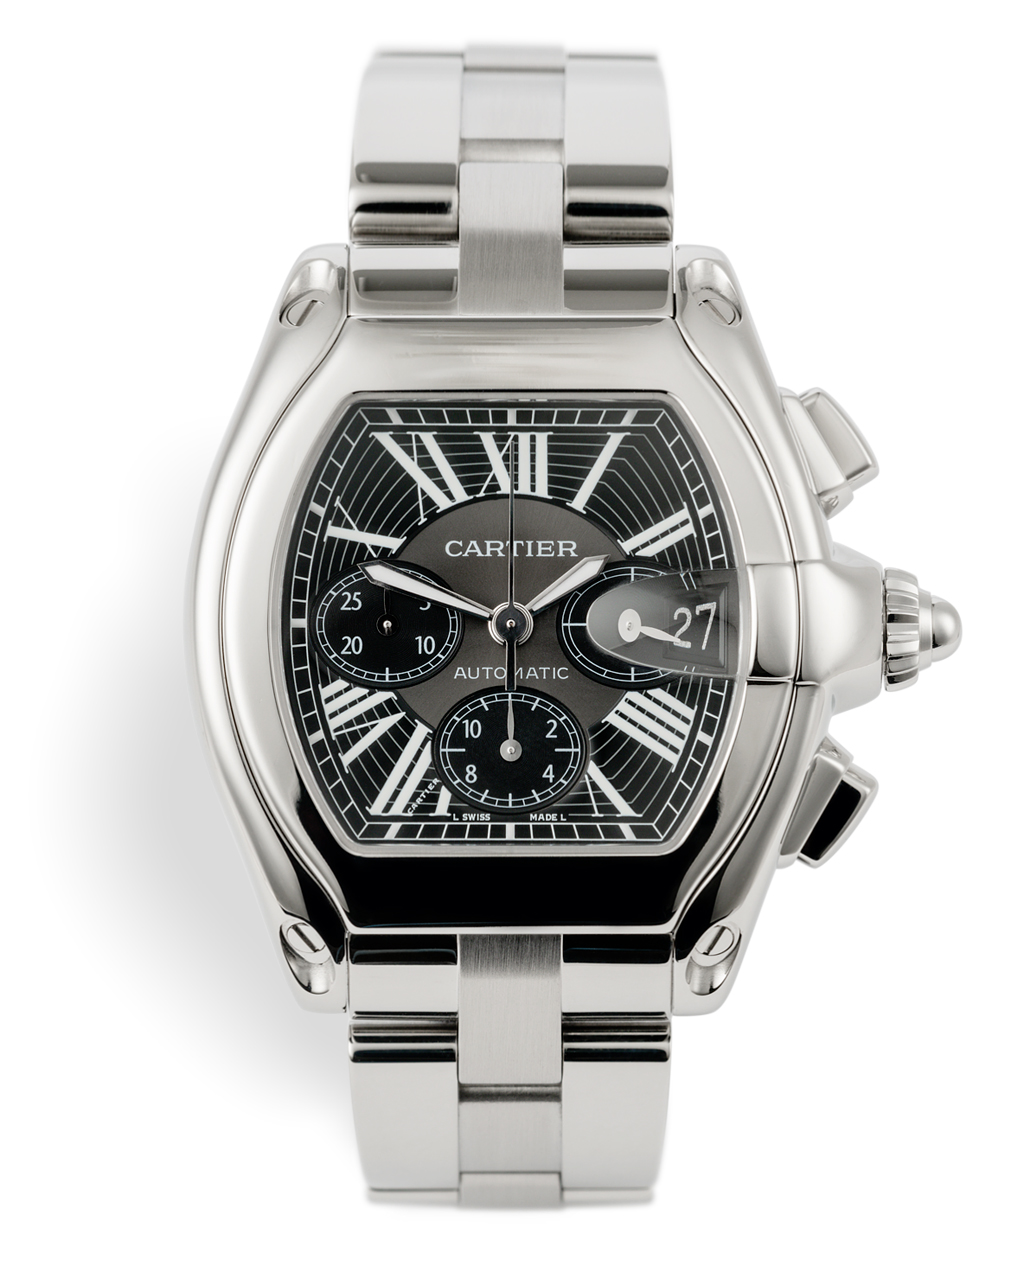 Cartier Roadster XL Chronograph Watches 